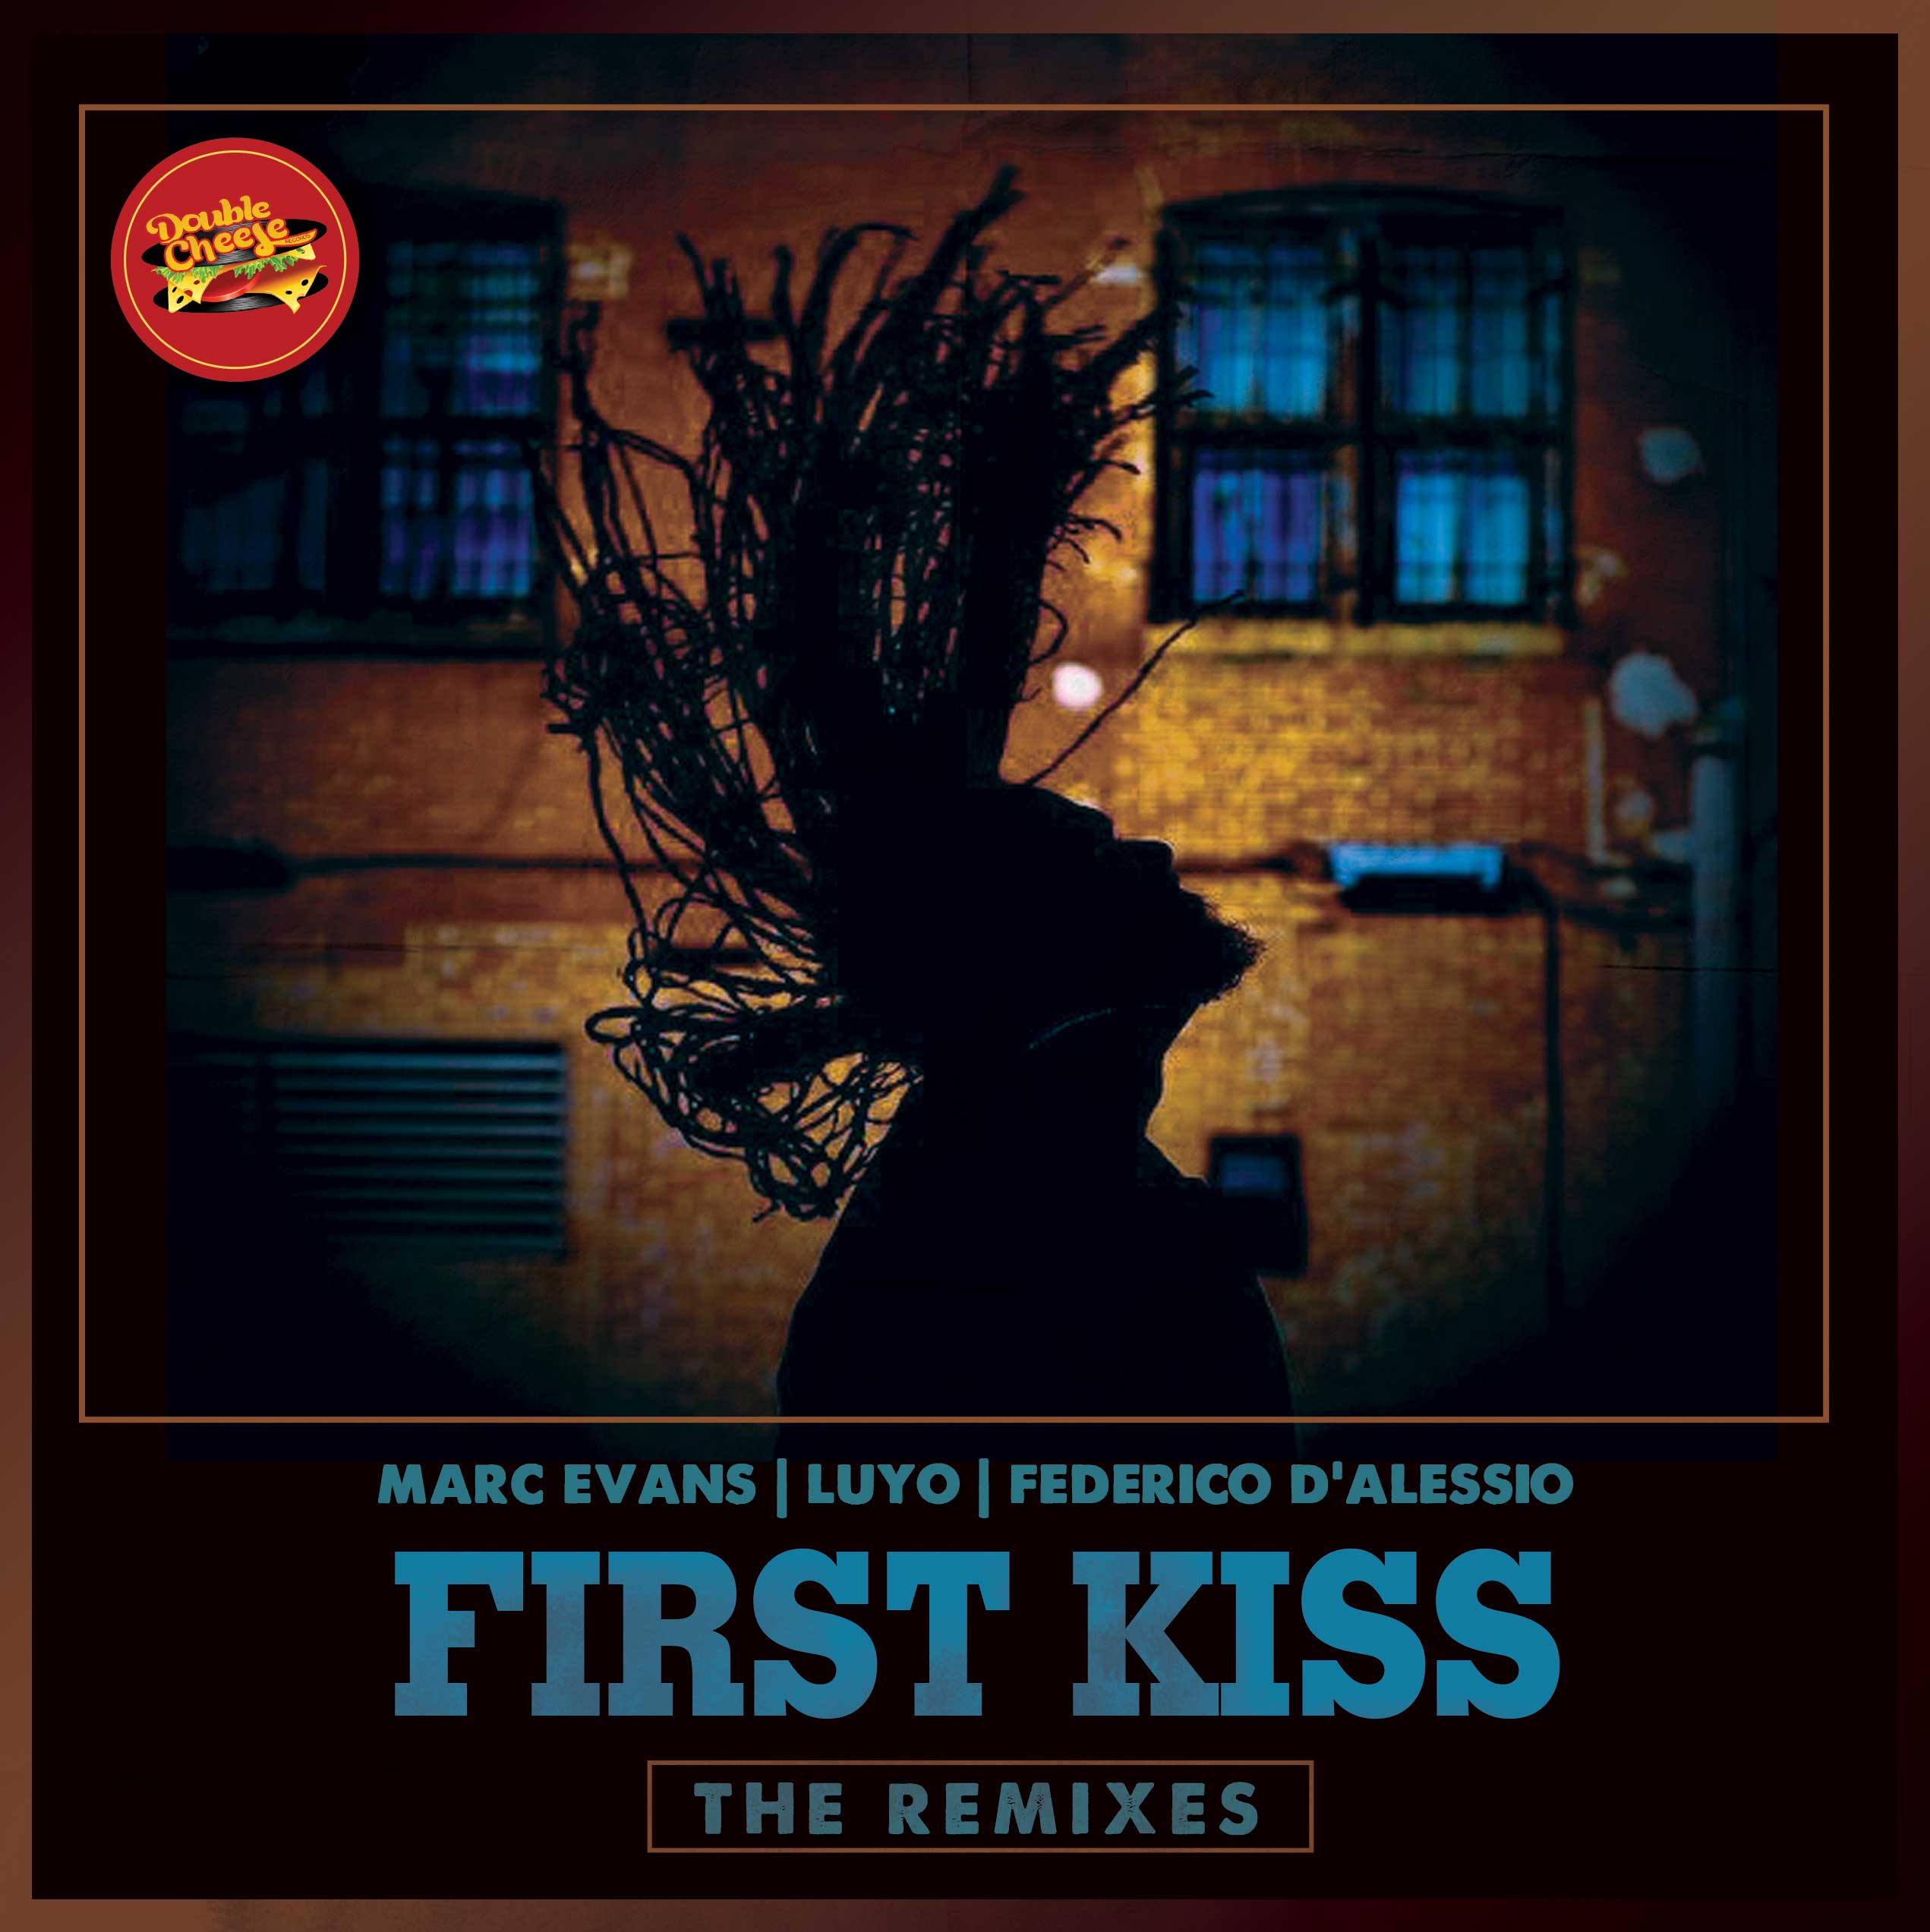 Marc Evans, Luyo, Federico D'Alessio - First Kiss (The Remixes)